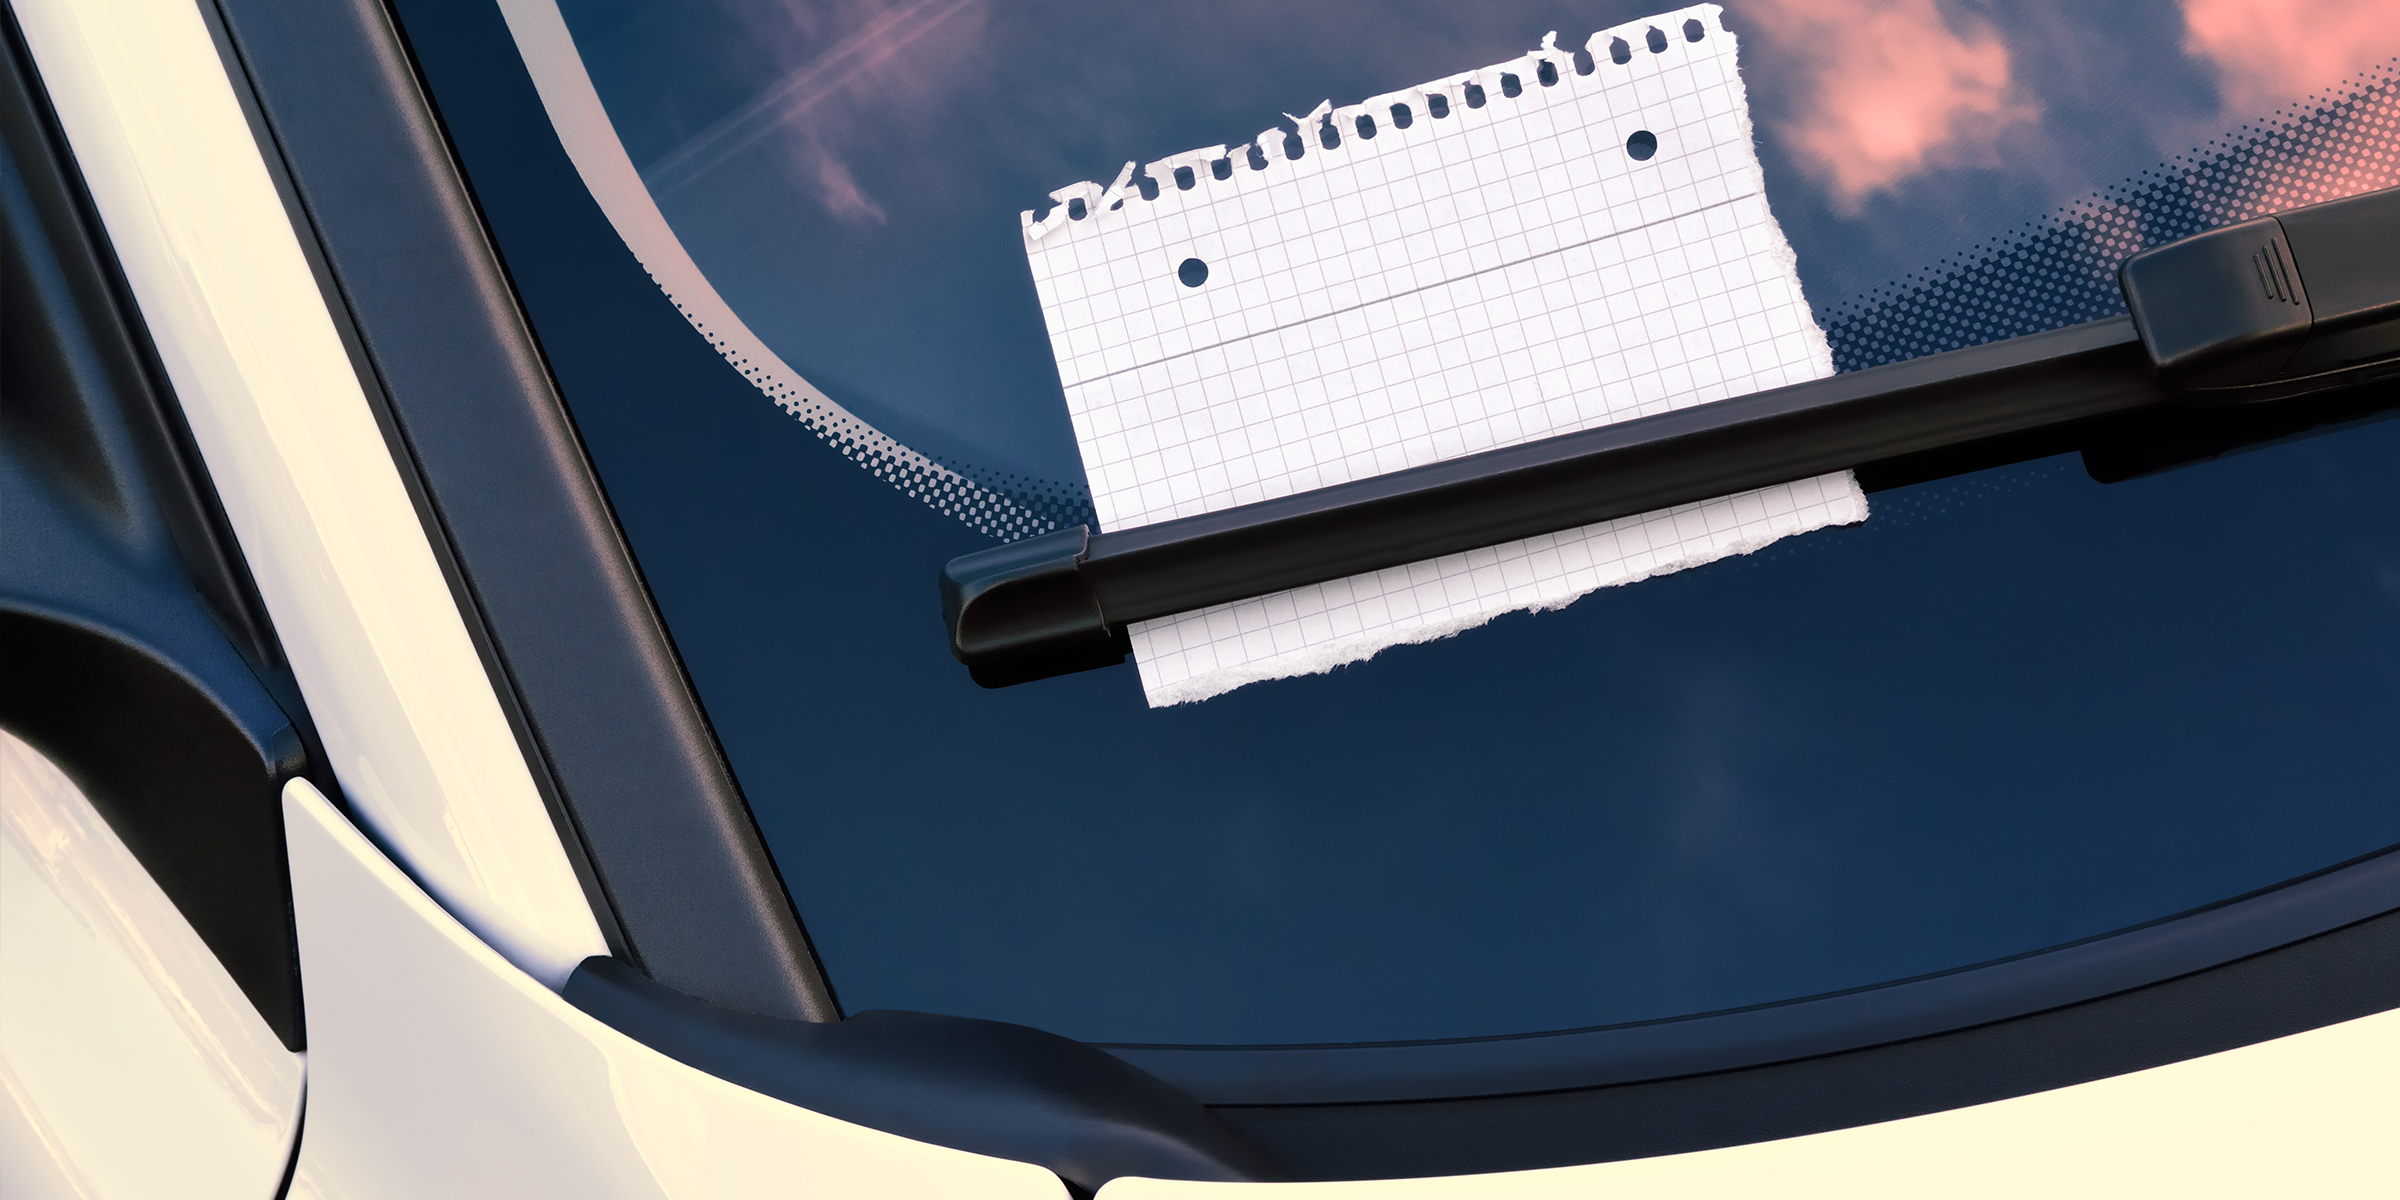 A note on a car windshield | Source: Shutterstock